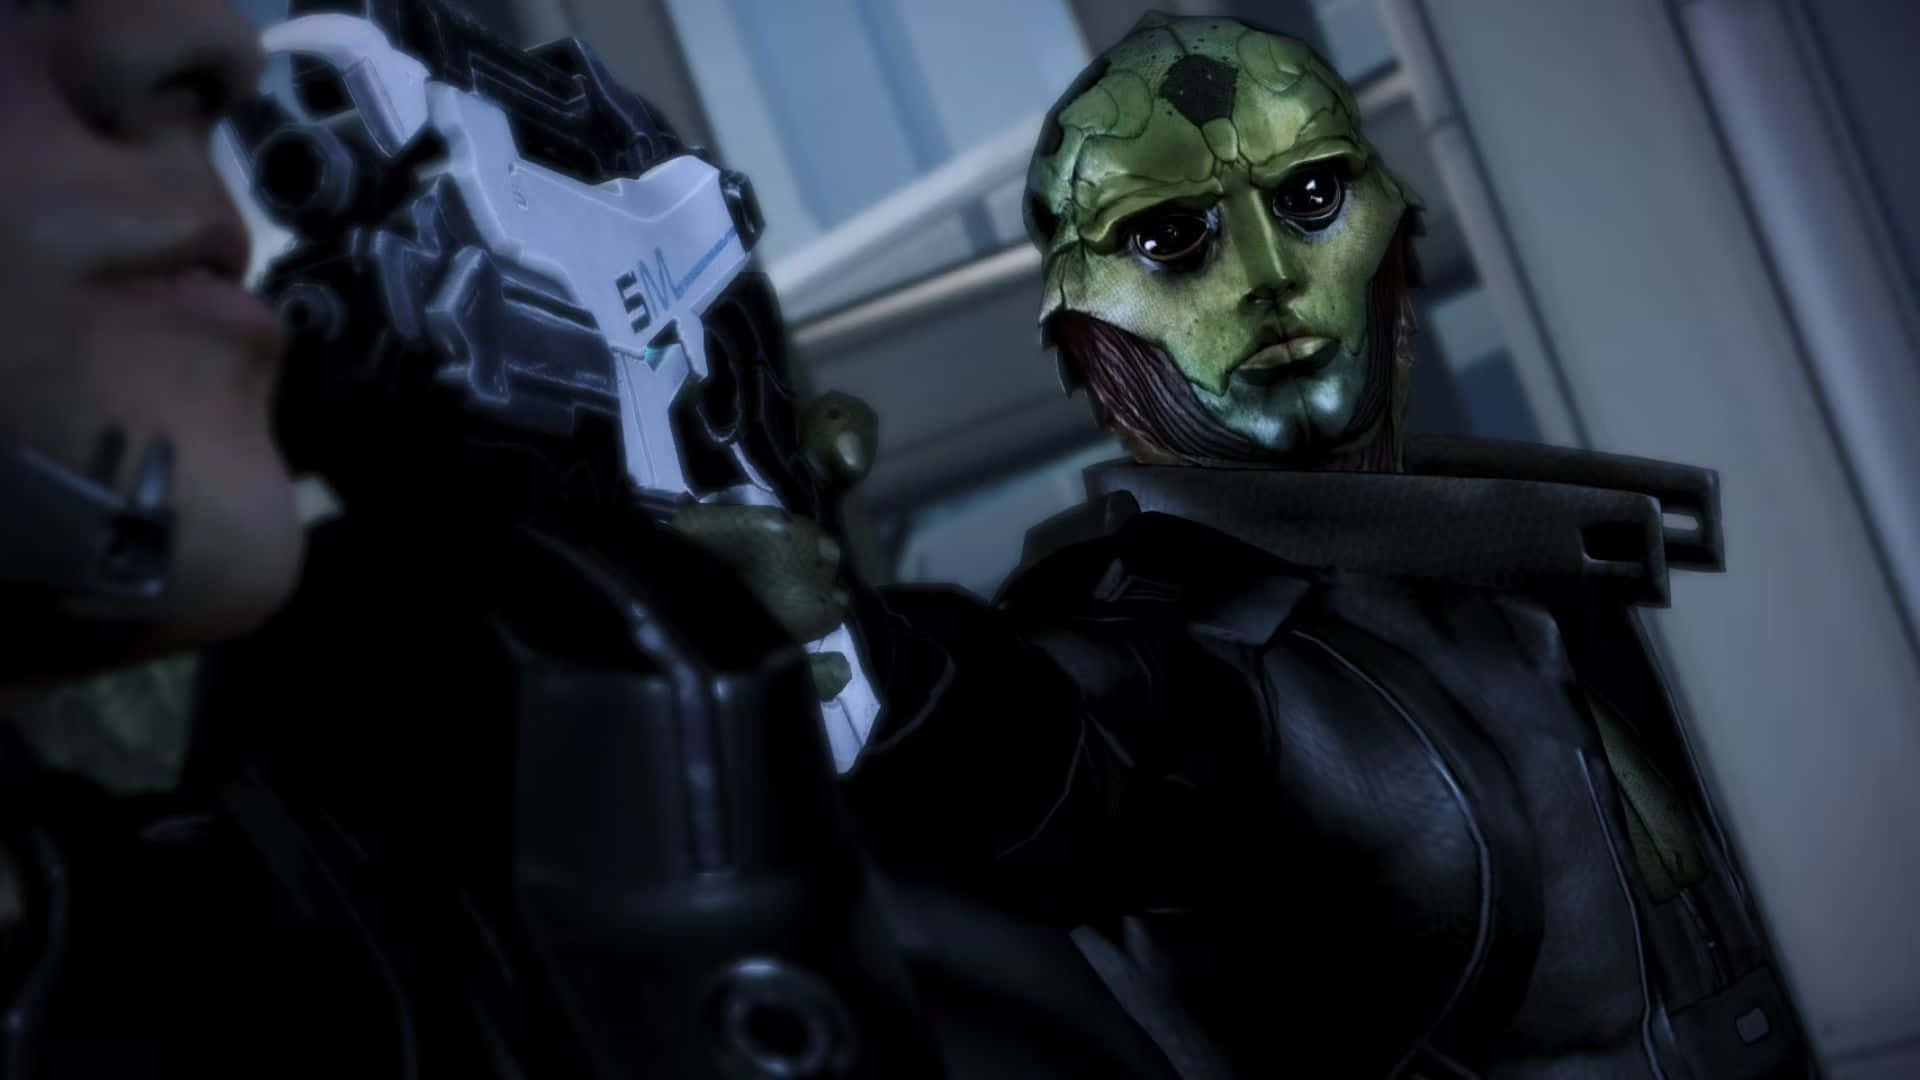 Thane Krios in Action Wallpaper